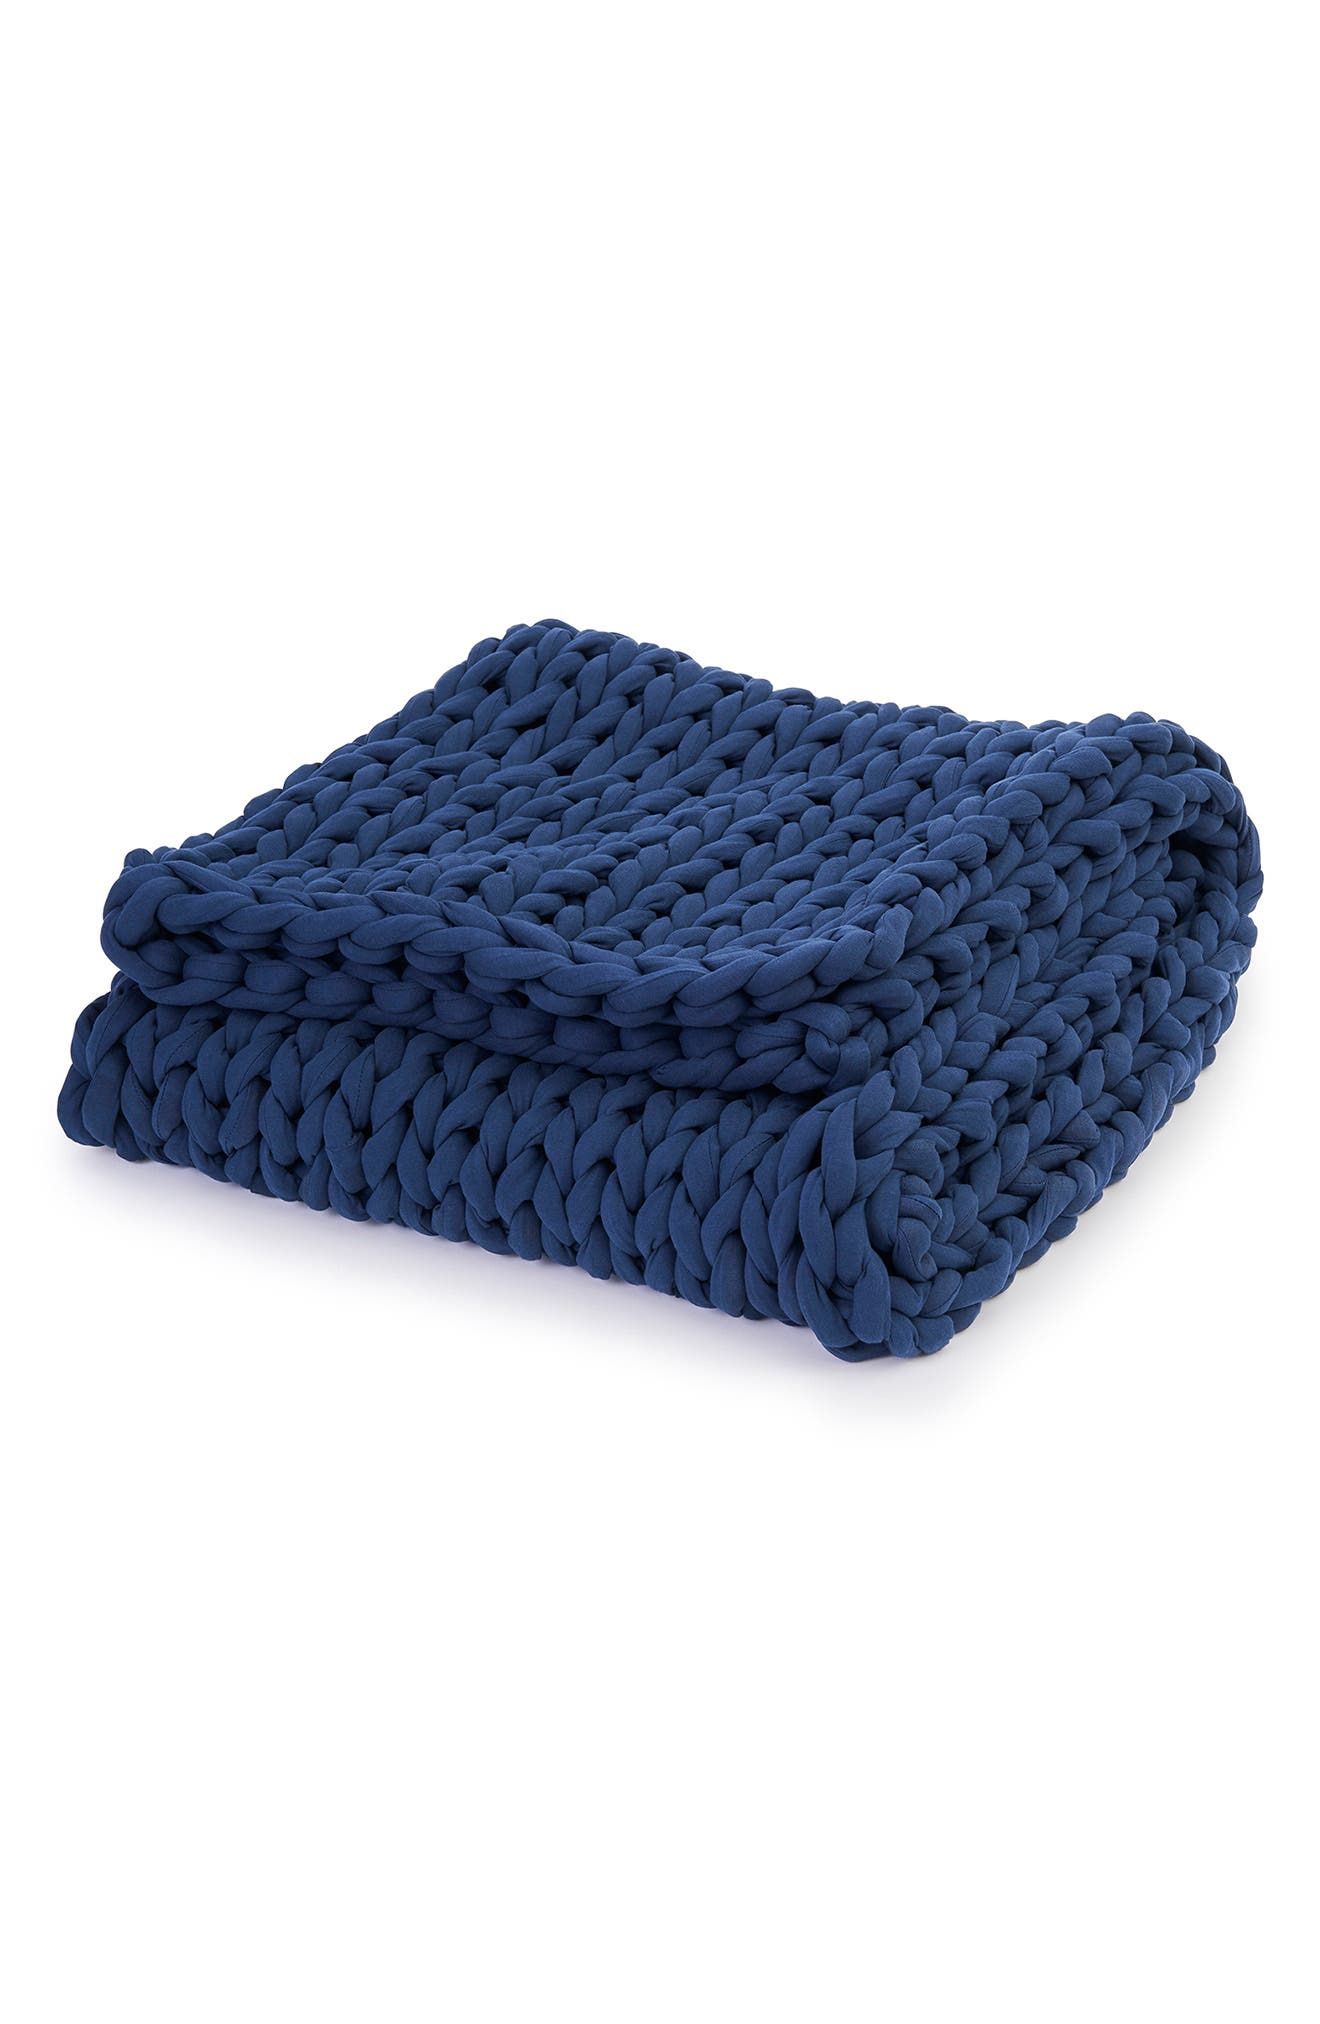 Weighted Knit Blanket